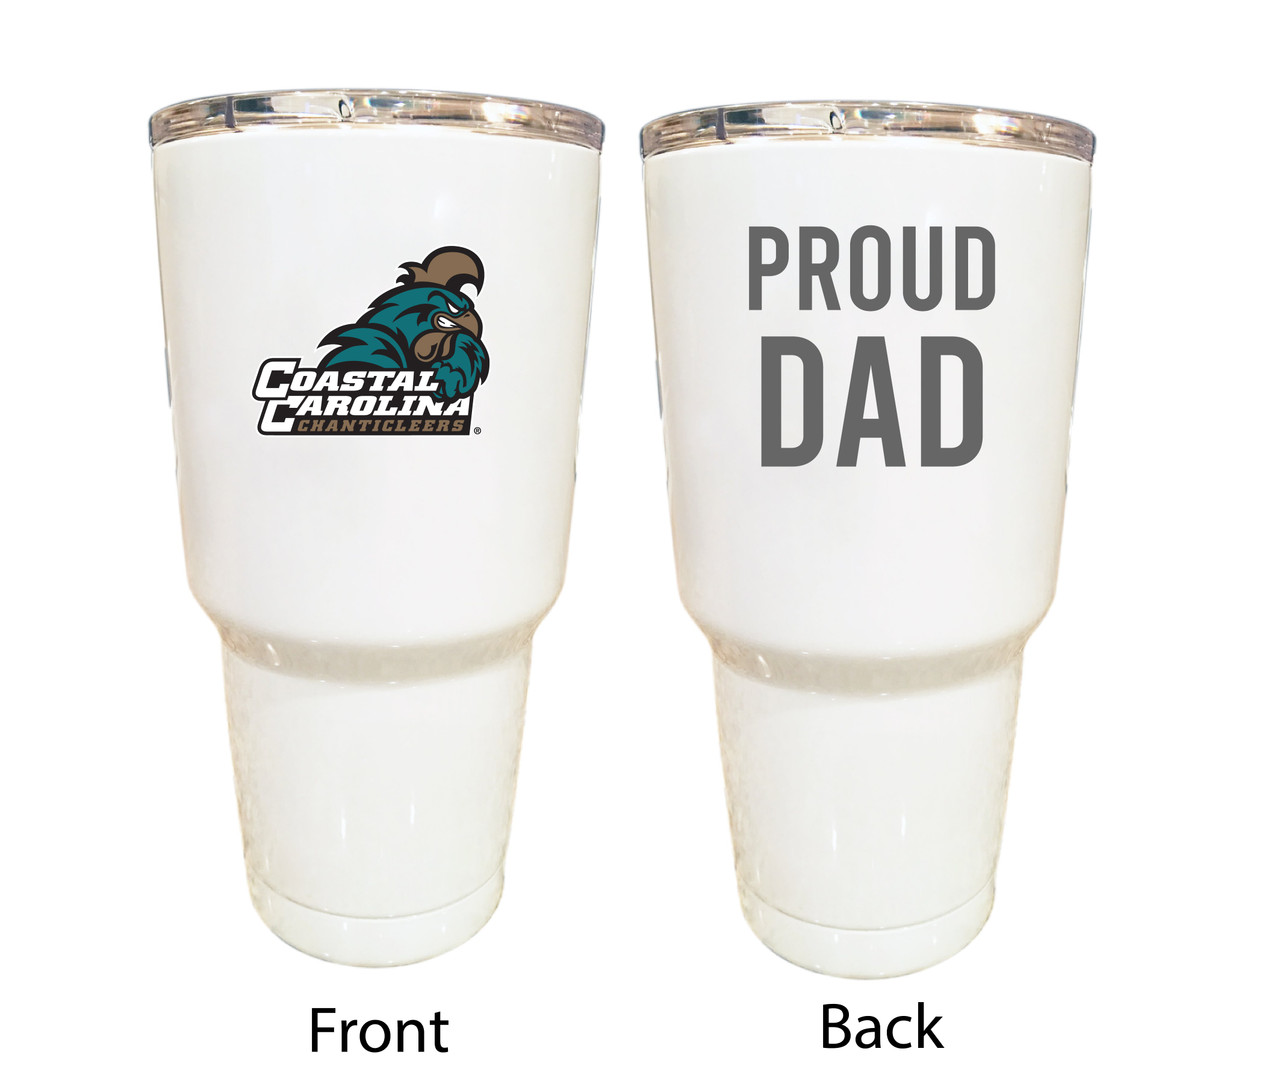 Coastal Carolina University Proud Dad 24 oz Insulated Stainless Steel Tumblers Choose Your Color.